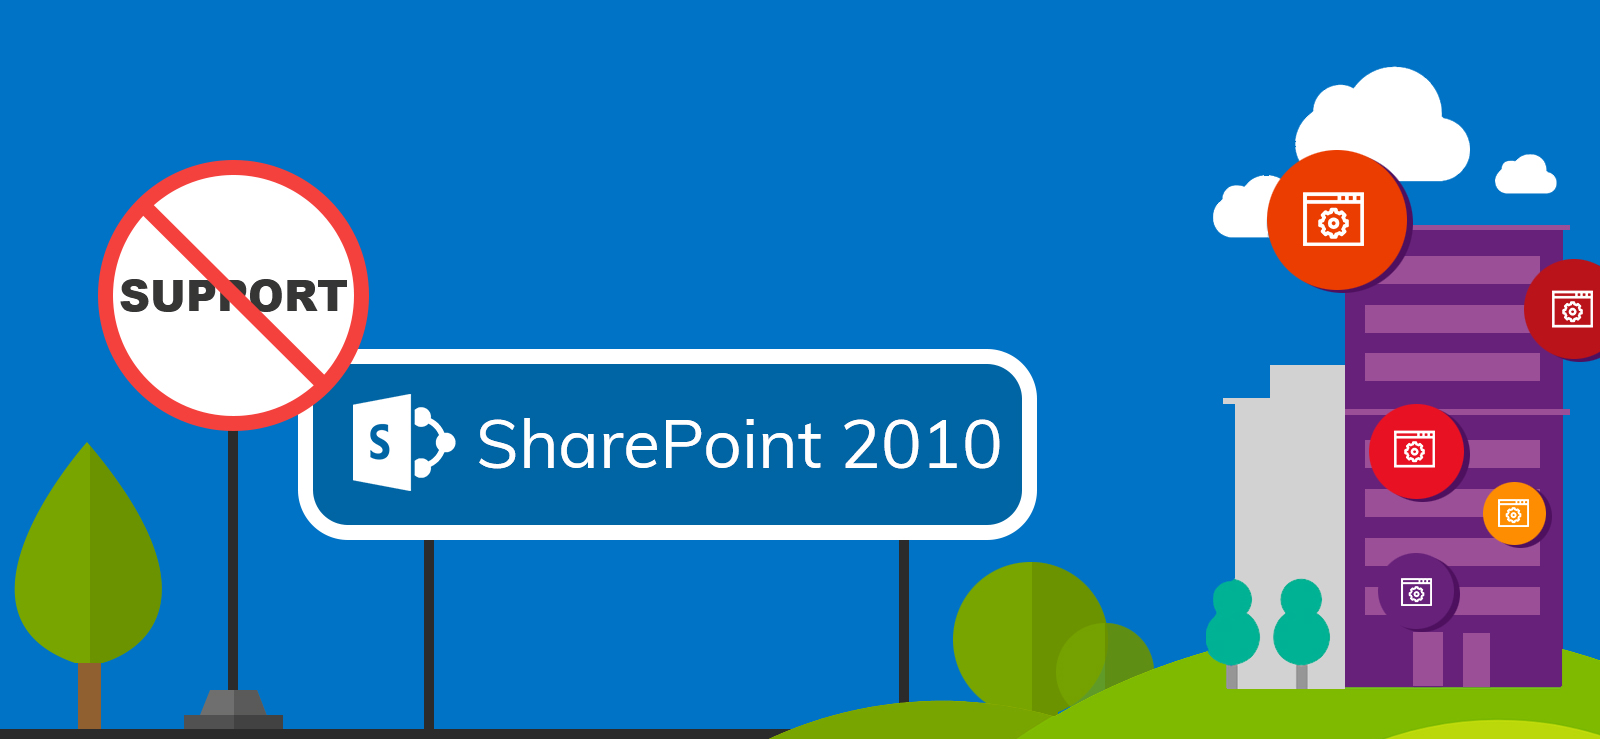 SharePoint 2010 – Your Options After the End of Extended Support